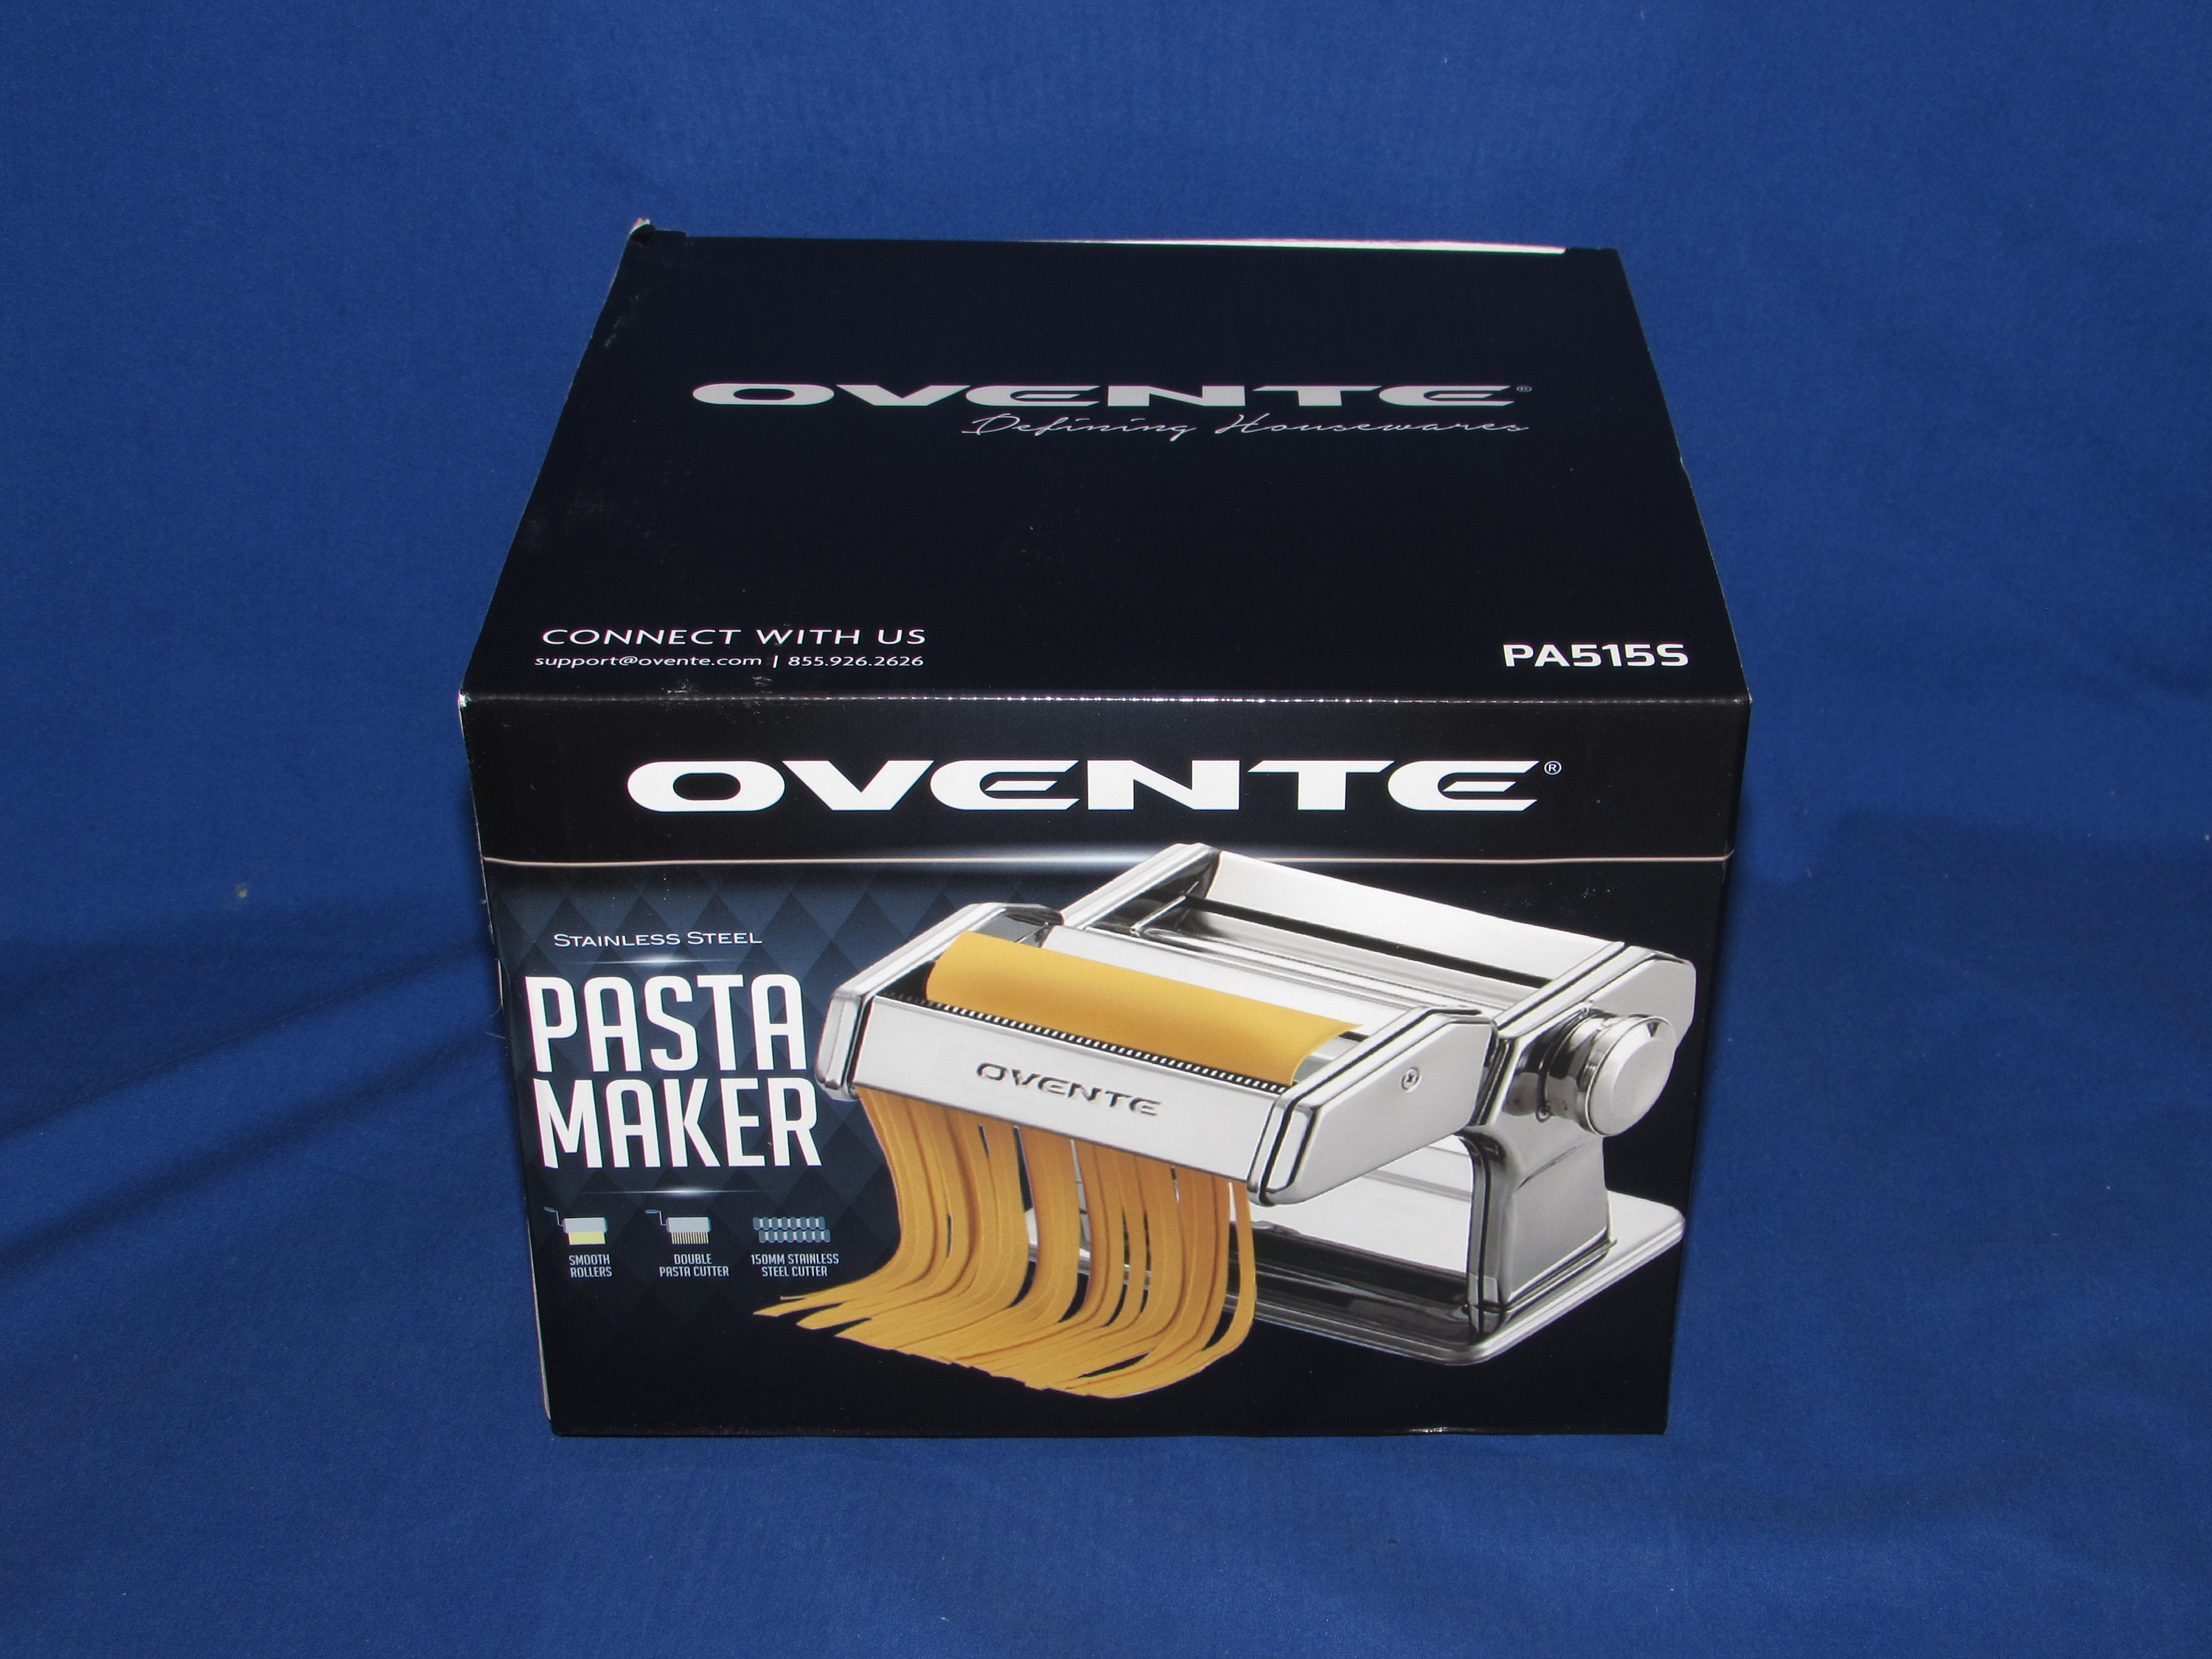 VINTAGE made in Italy pasta machine 6 Marcato pasta maker in box Cook's  Tools